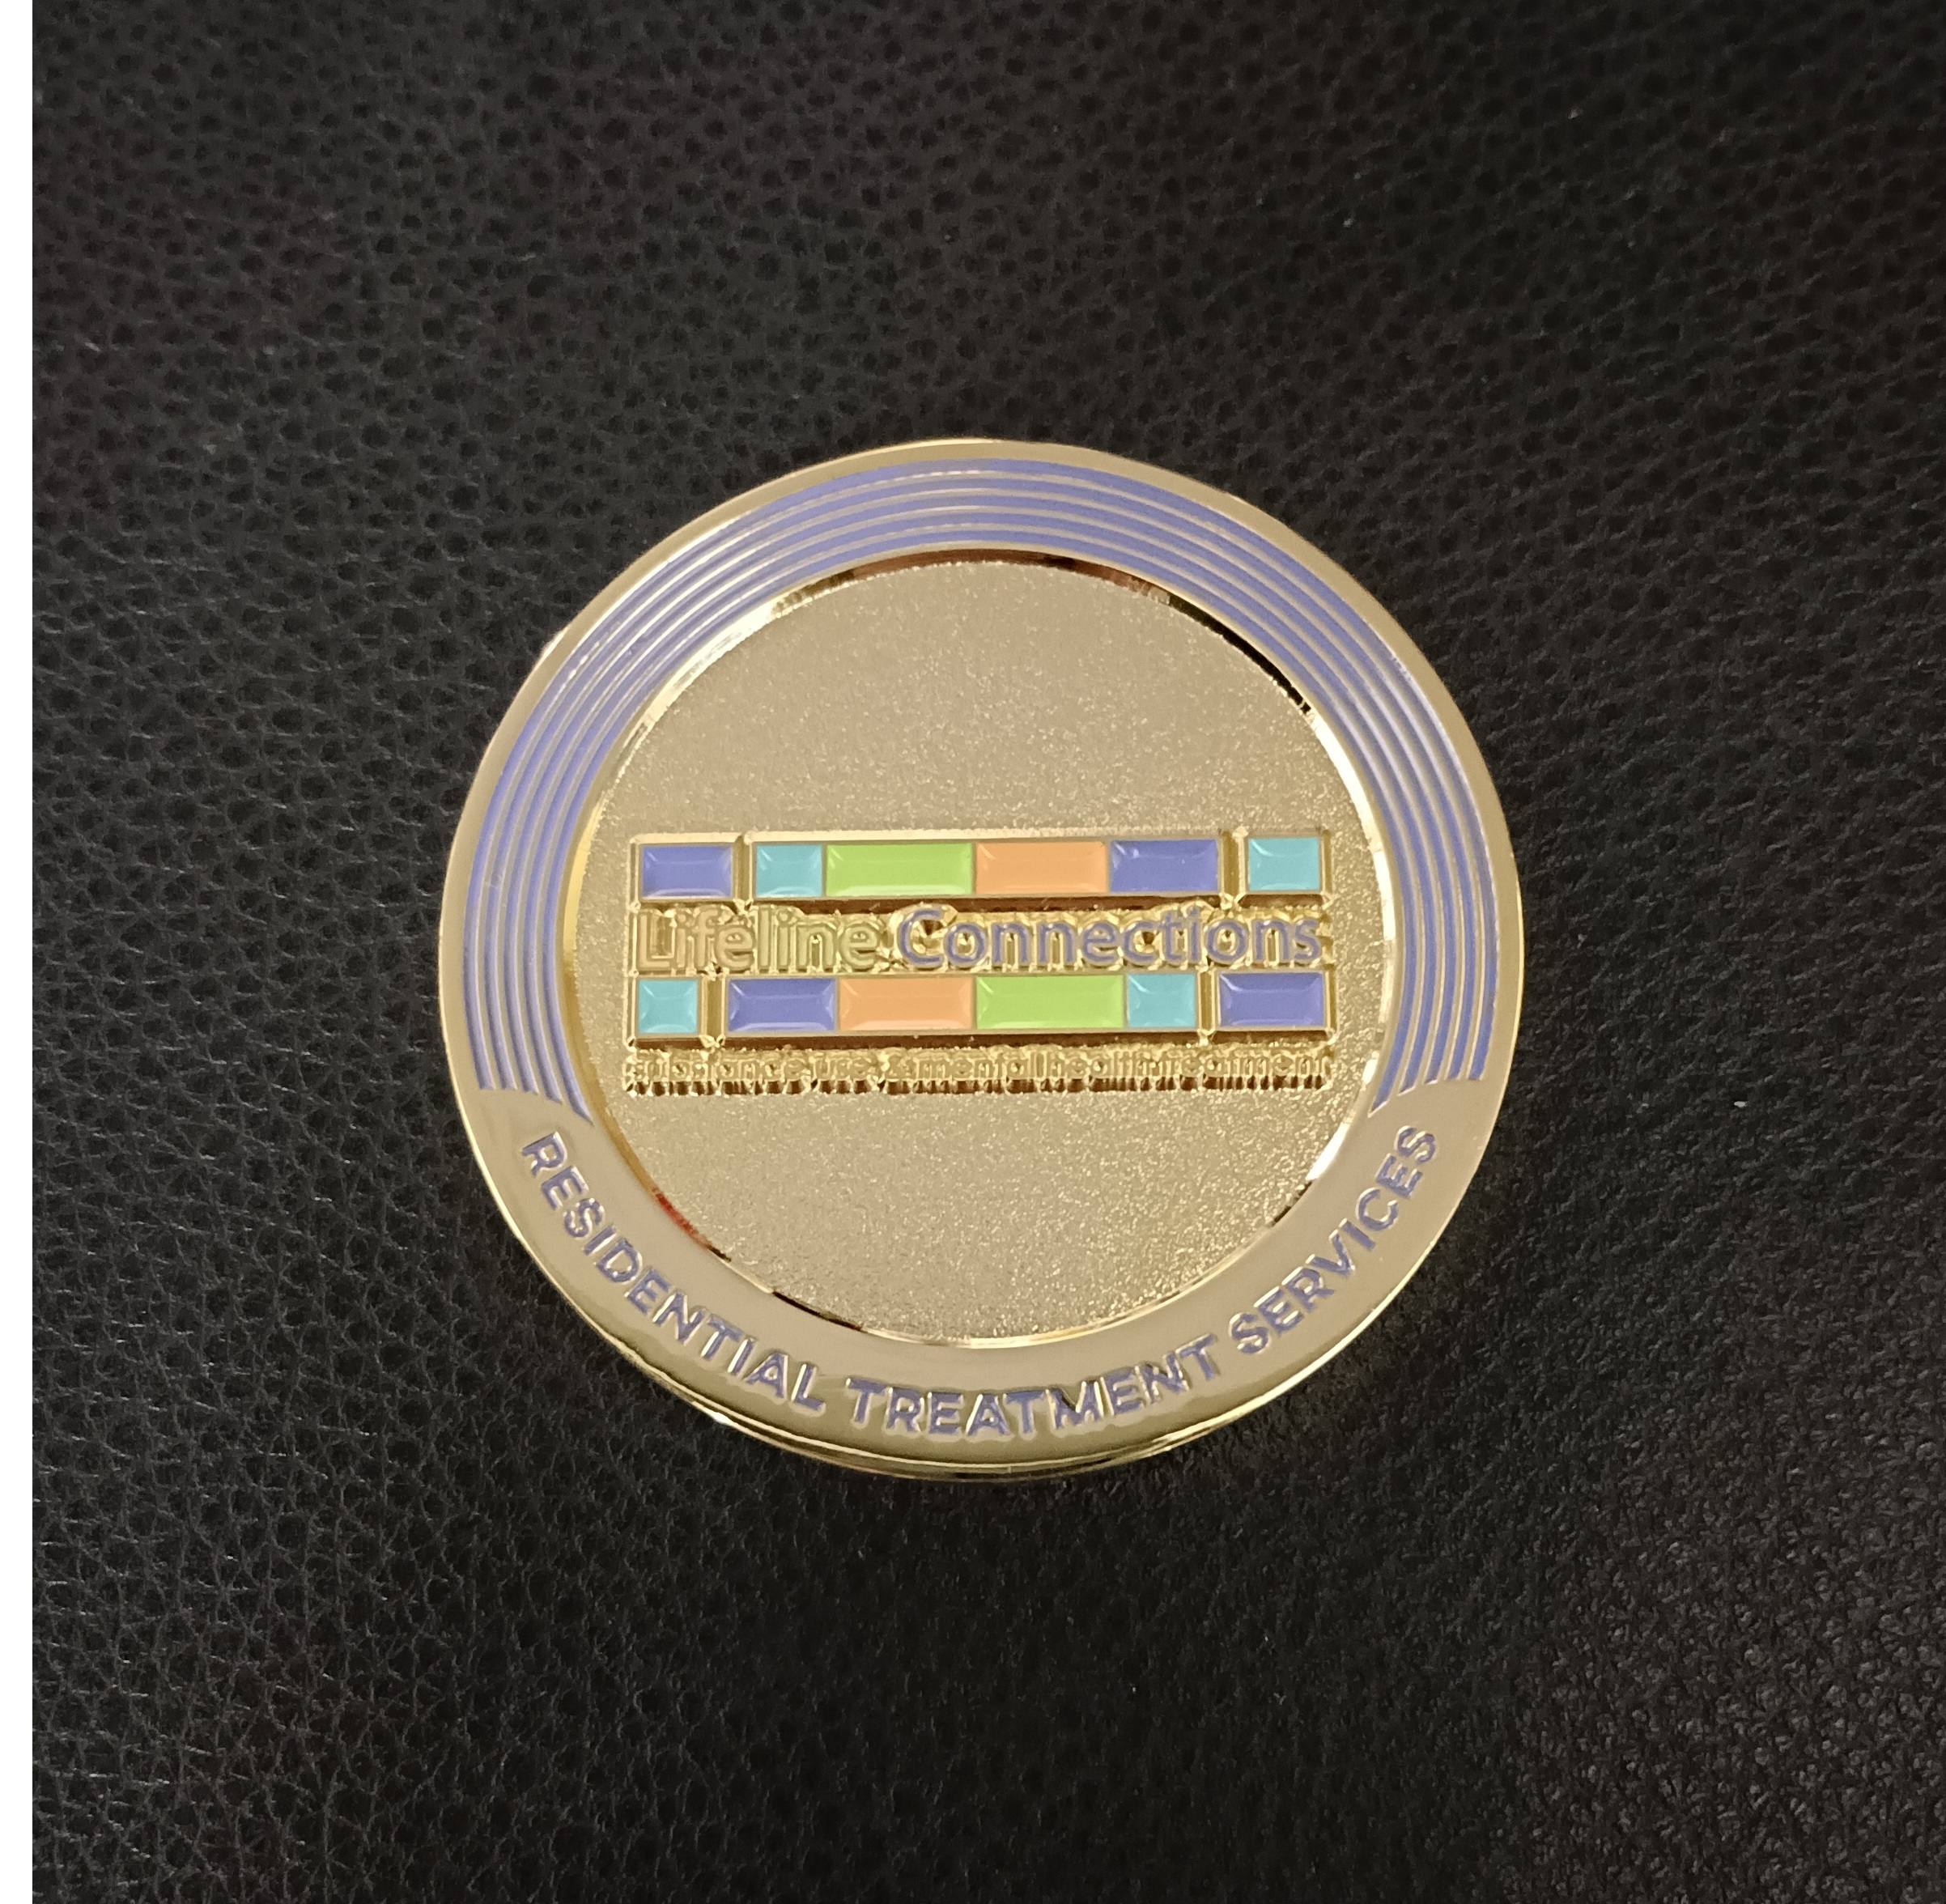 Medical Company Challenge Coin